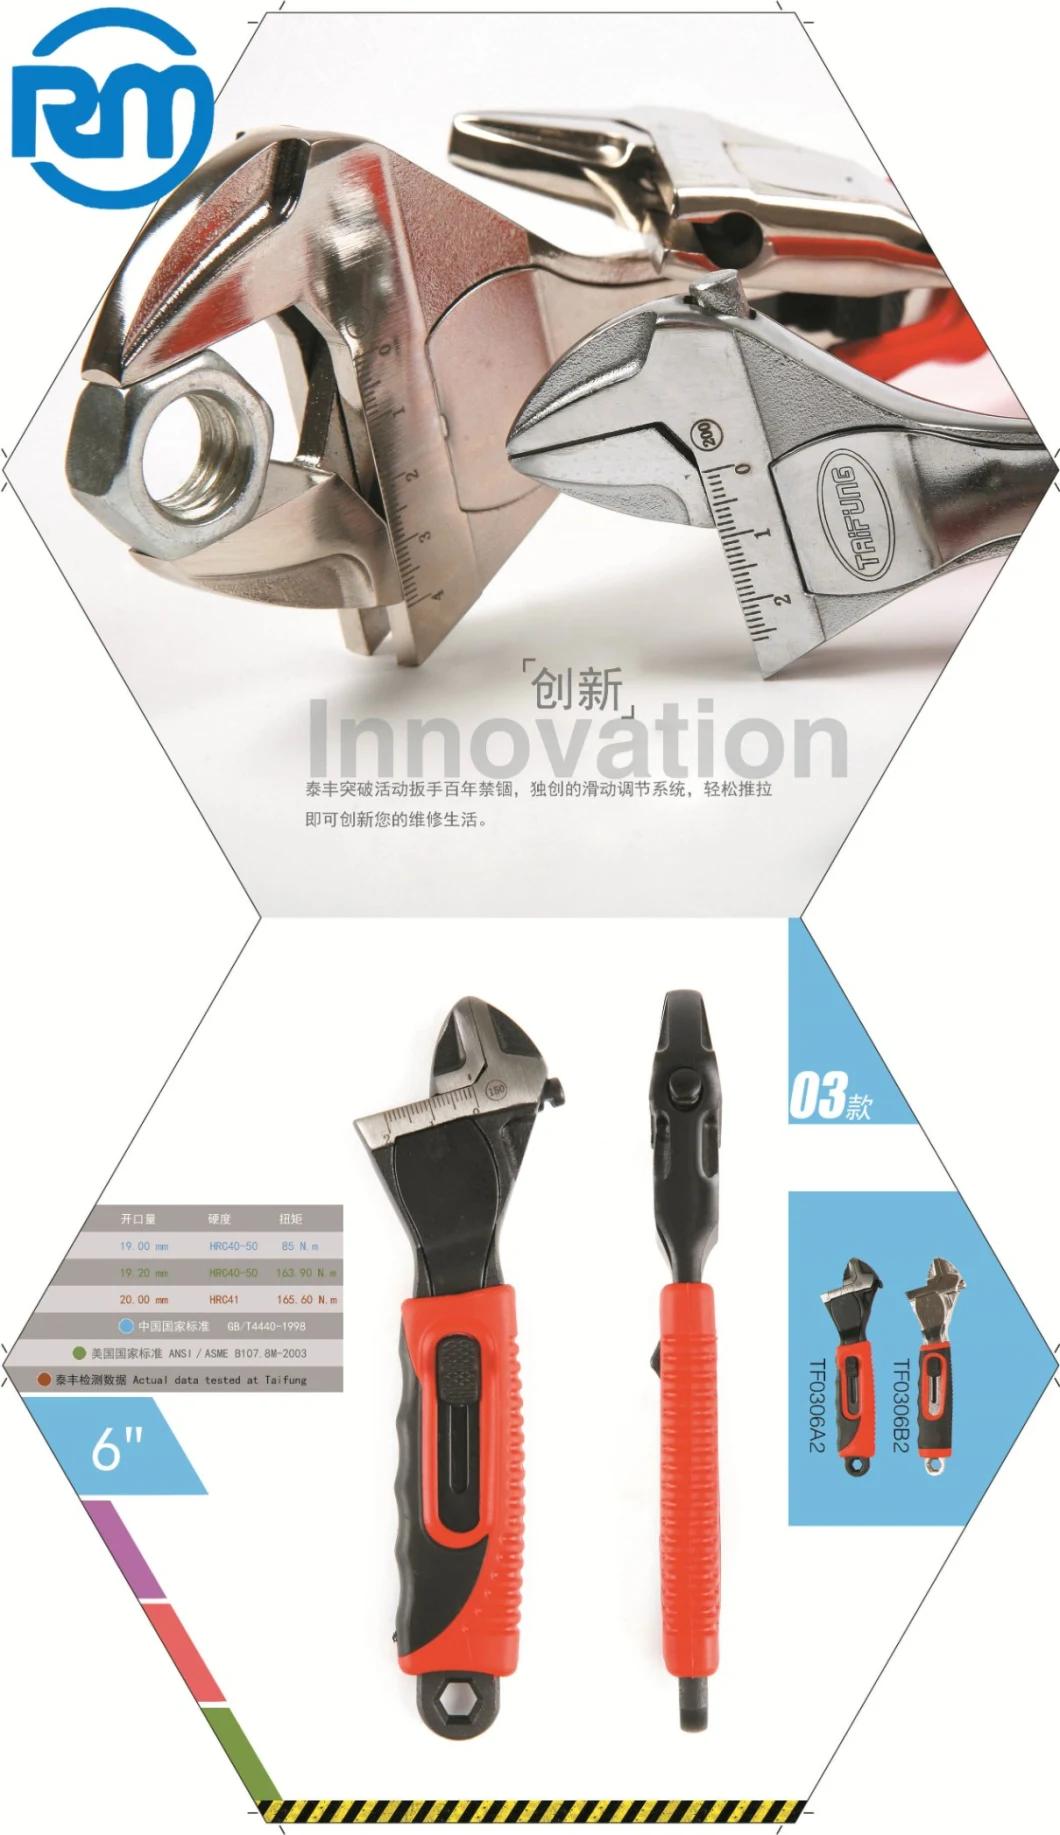 Easily Push and Pull Cheap Carbon Steel Adjustable Wrench Nickel Plating Surface Professional Quality Sliding Button